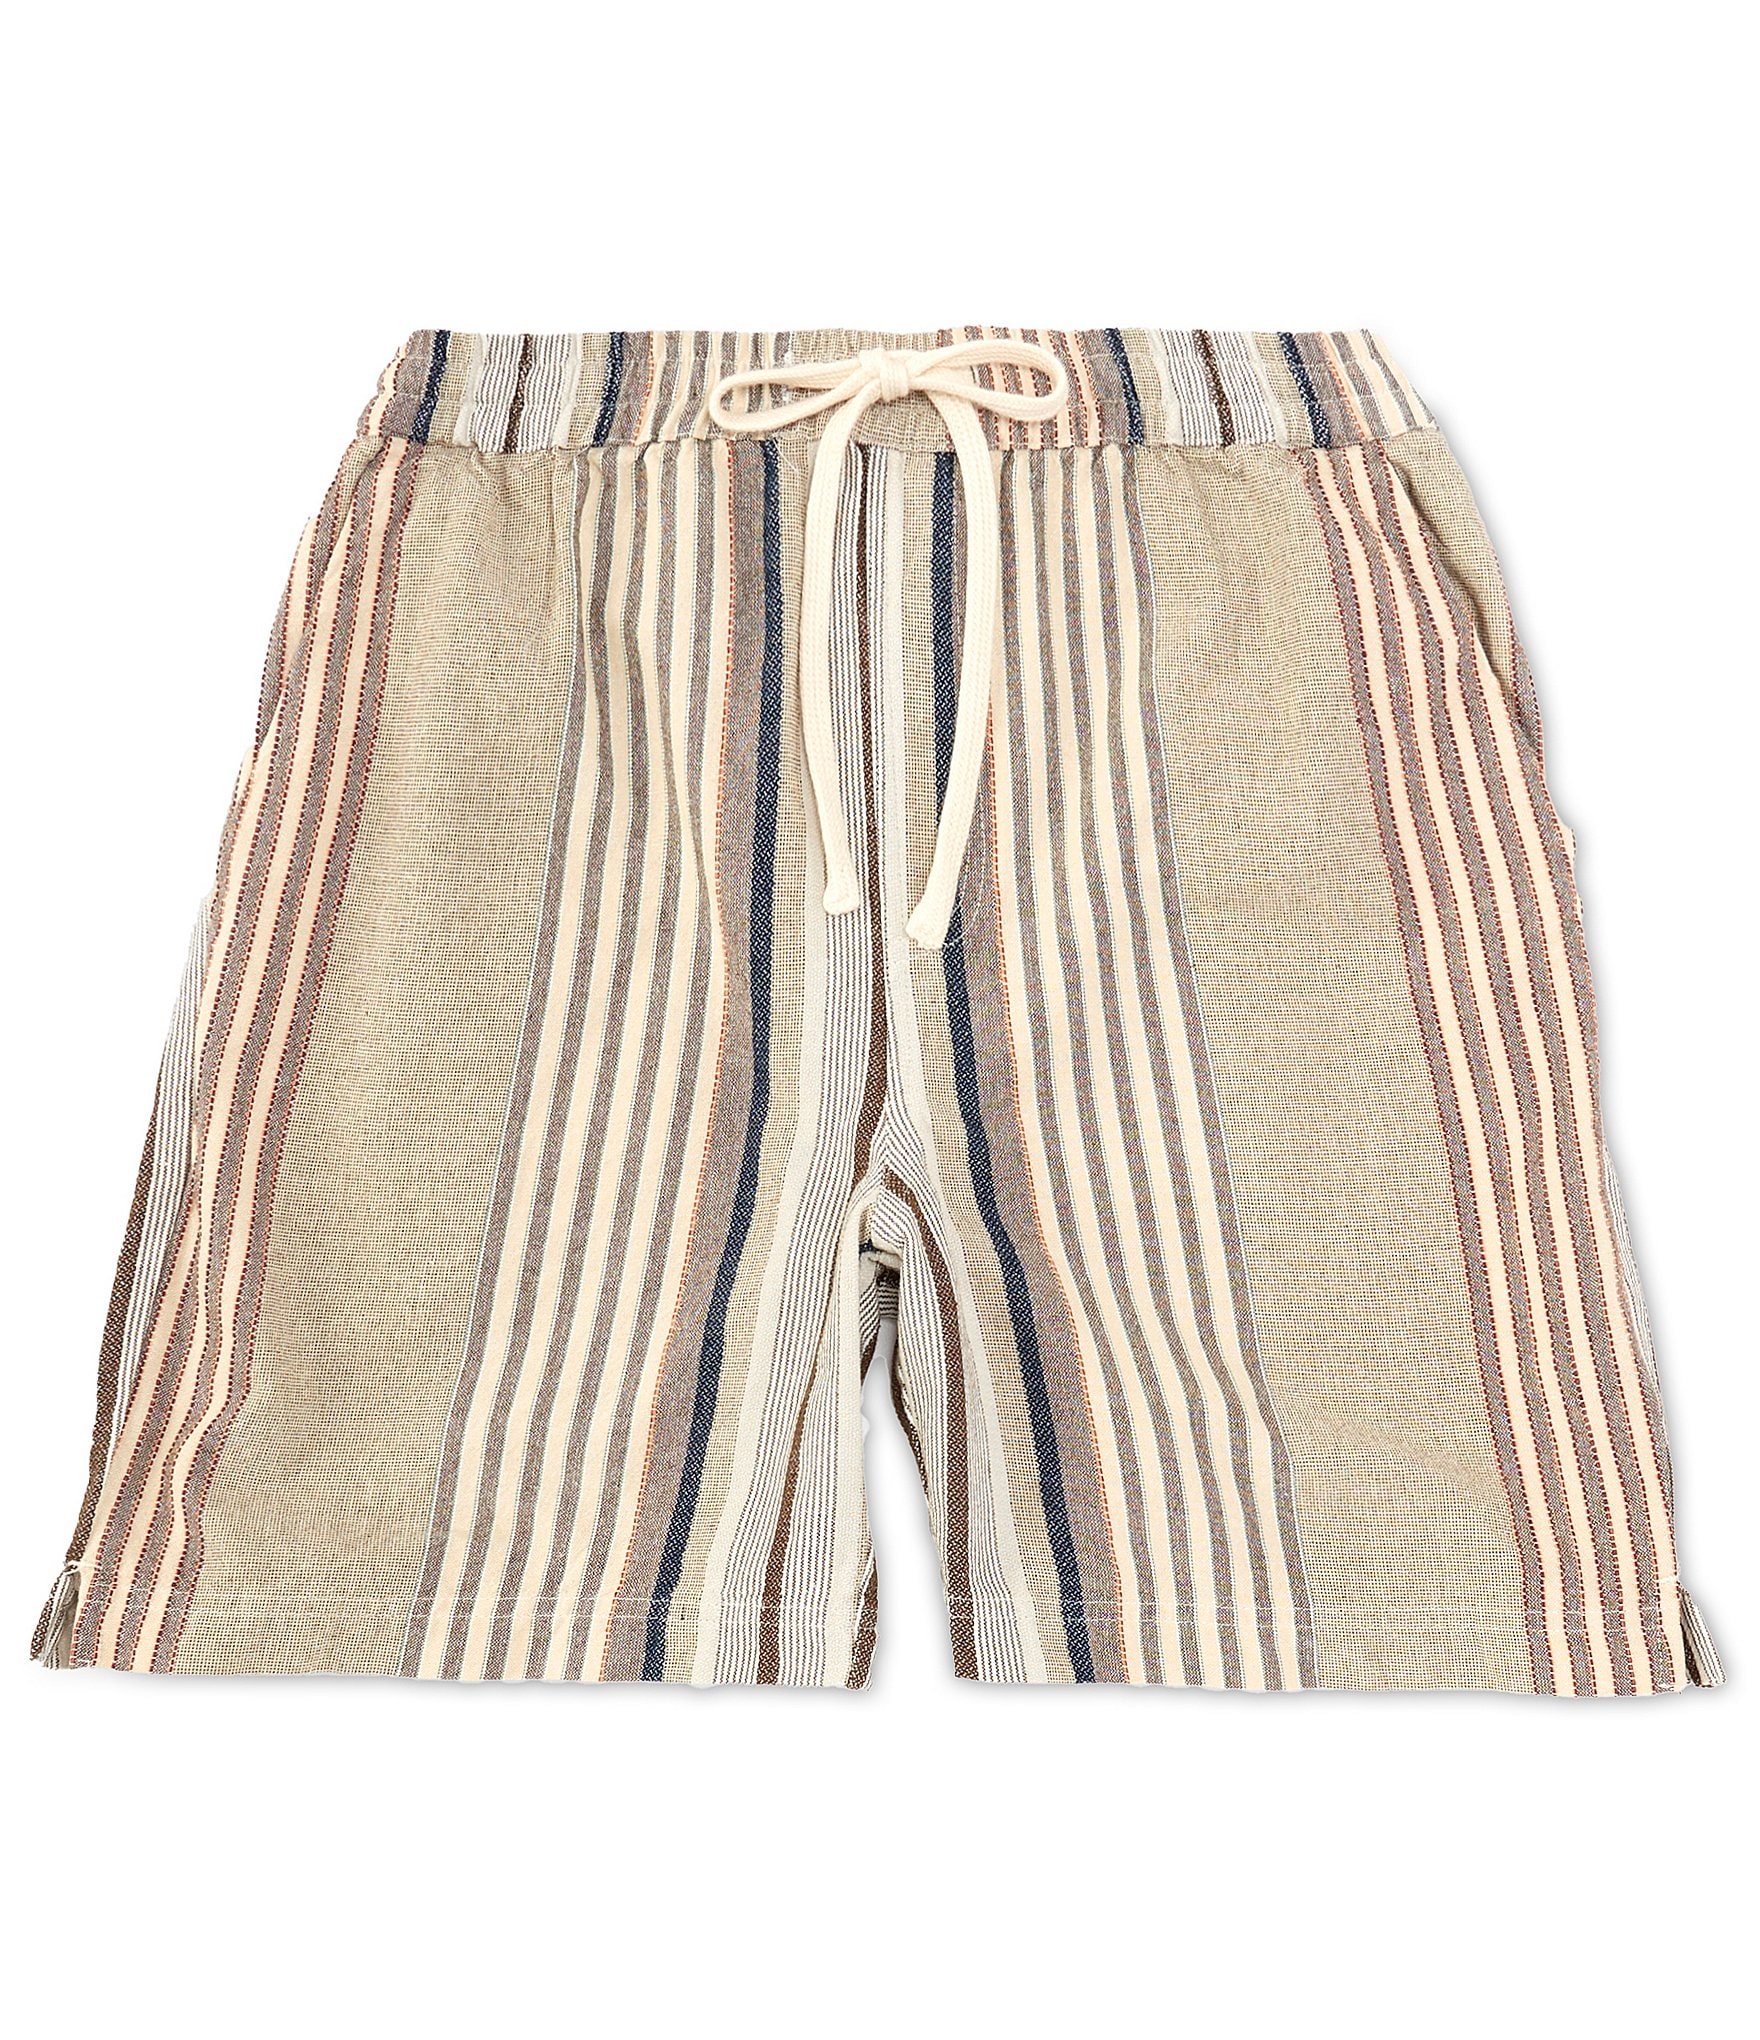 BDG Urban Outfitters Woven Stripe Pull On Shorts